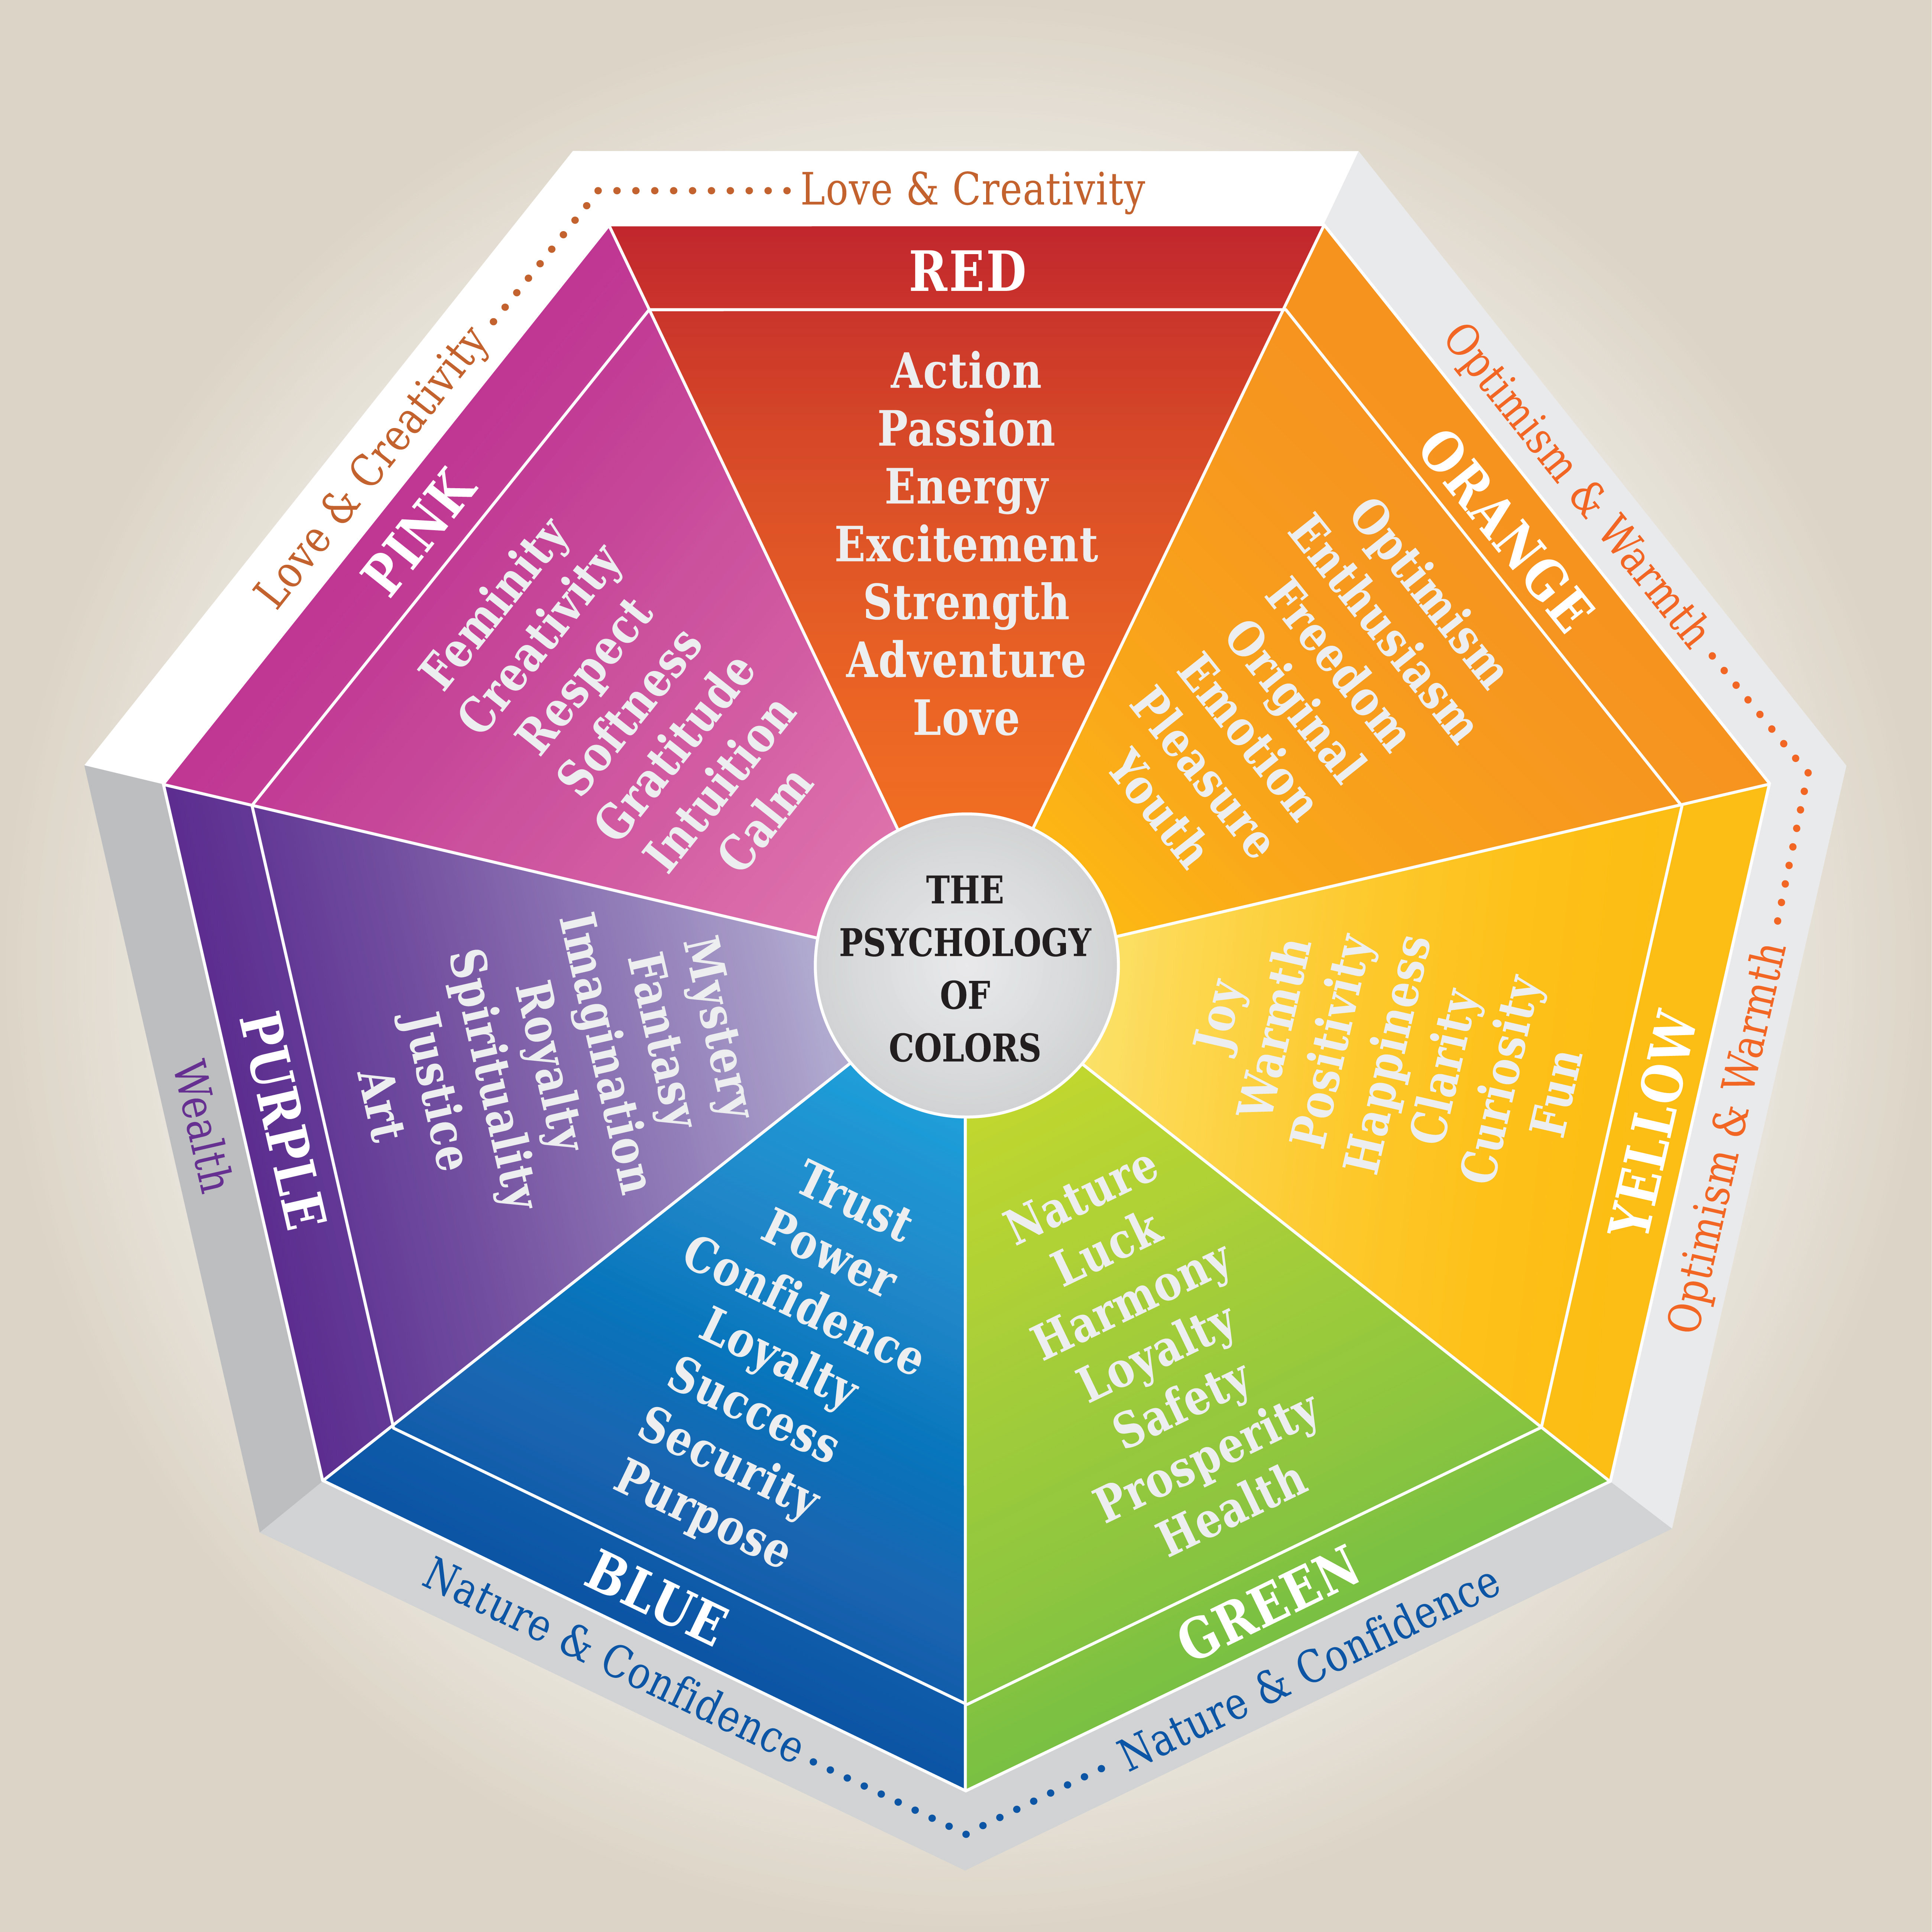 Color wheel with descriptions of the psychology of colors may help with branding.